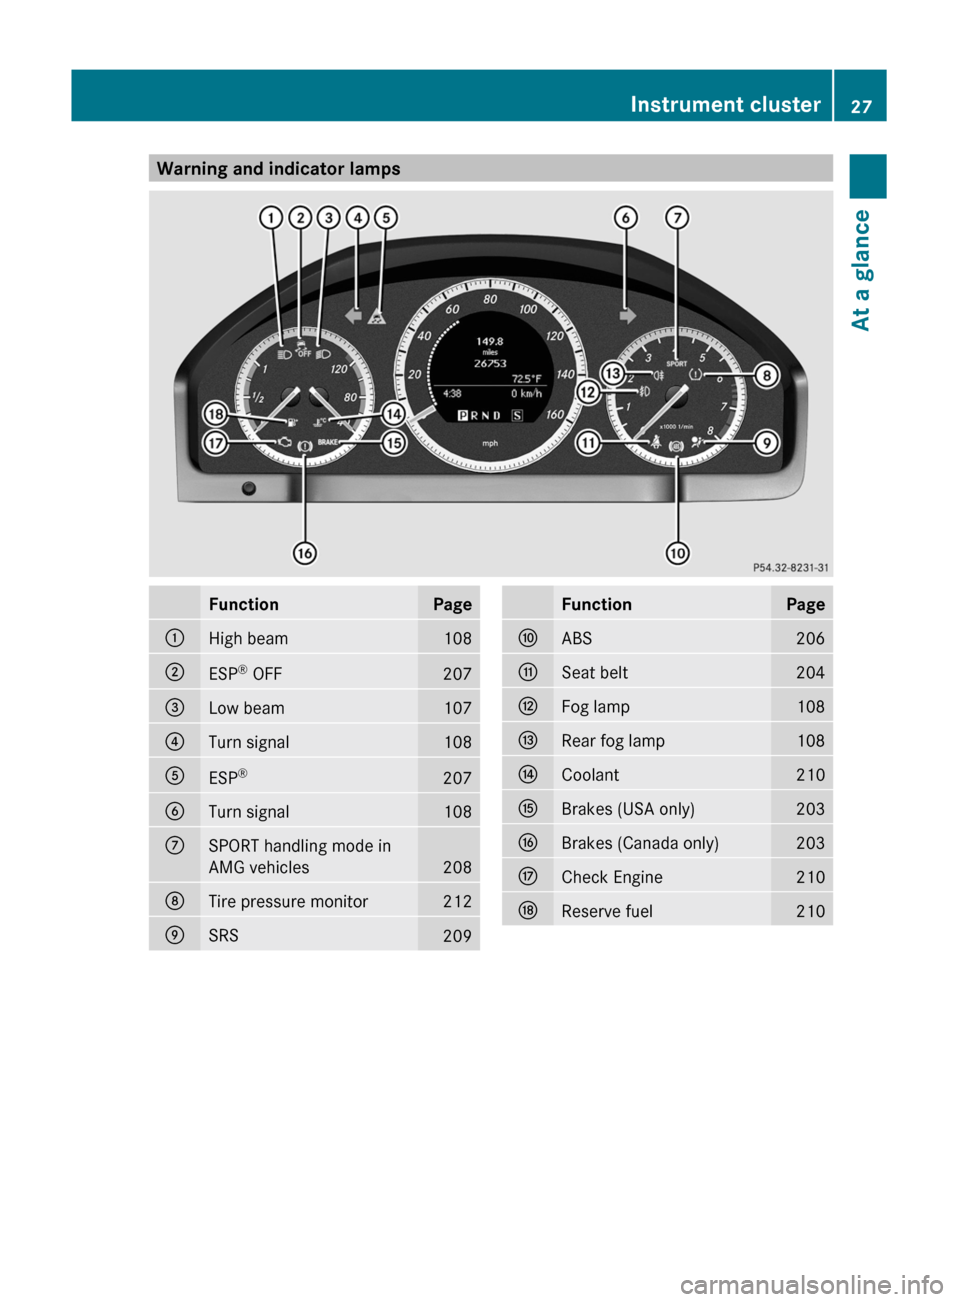 MERCEDES-BENZ C-Class 2011 W204 User Guide Warning and indicator lampsFunctionPage:High beam108;ESP®
 OFF207=Low beam107?Turn signal108AESP ®207BTurn signal108CSPORT handling mode in
AMG vehicles
208
DTire pressure monitor212ESRS209FunctionP